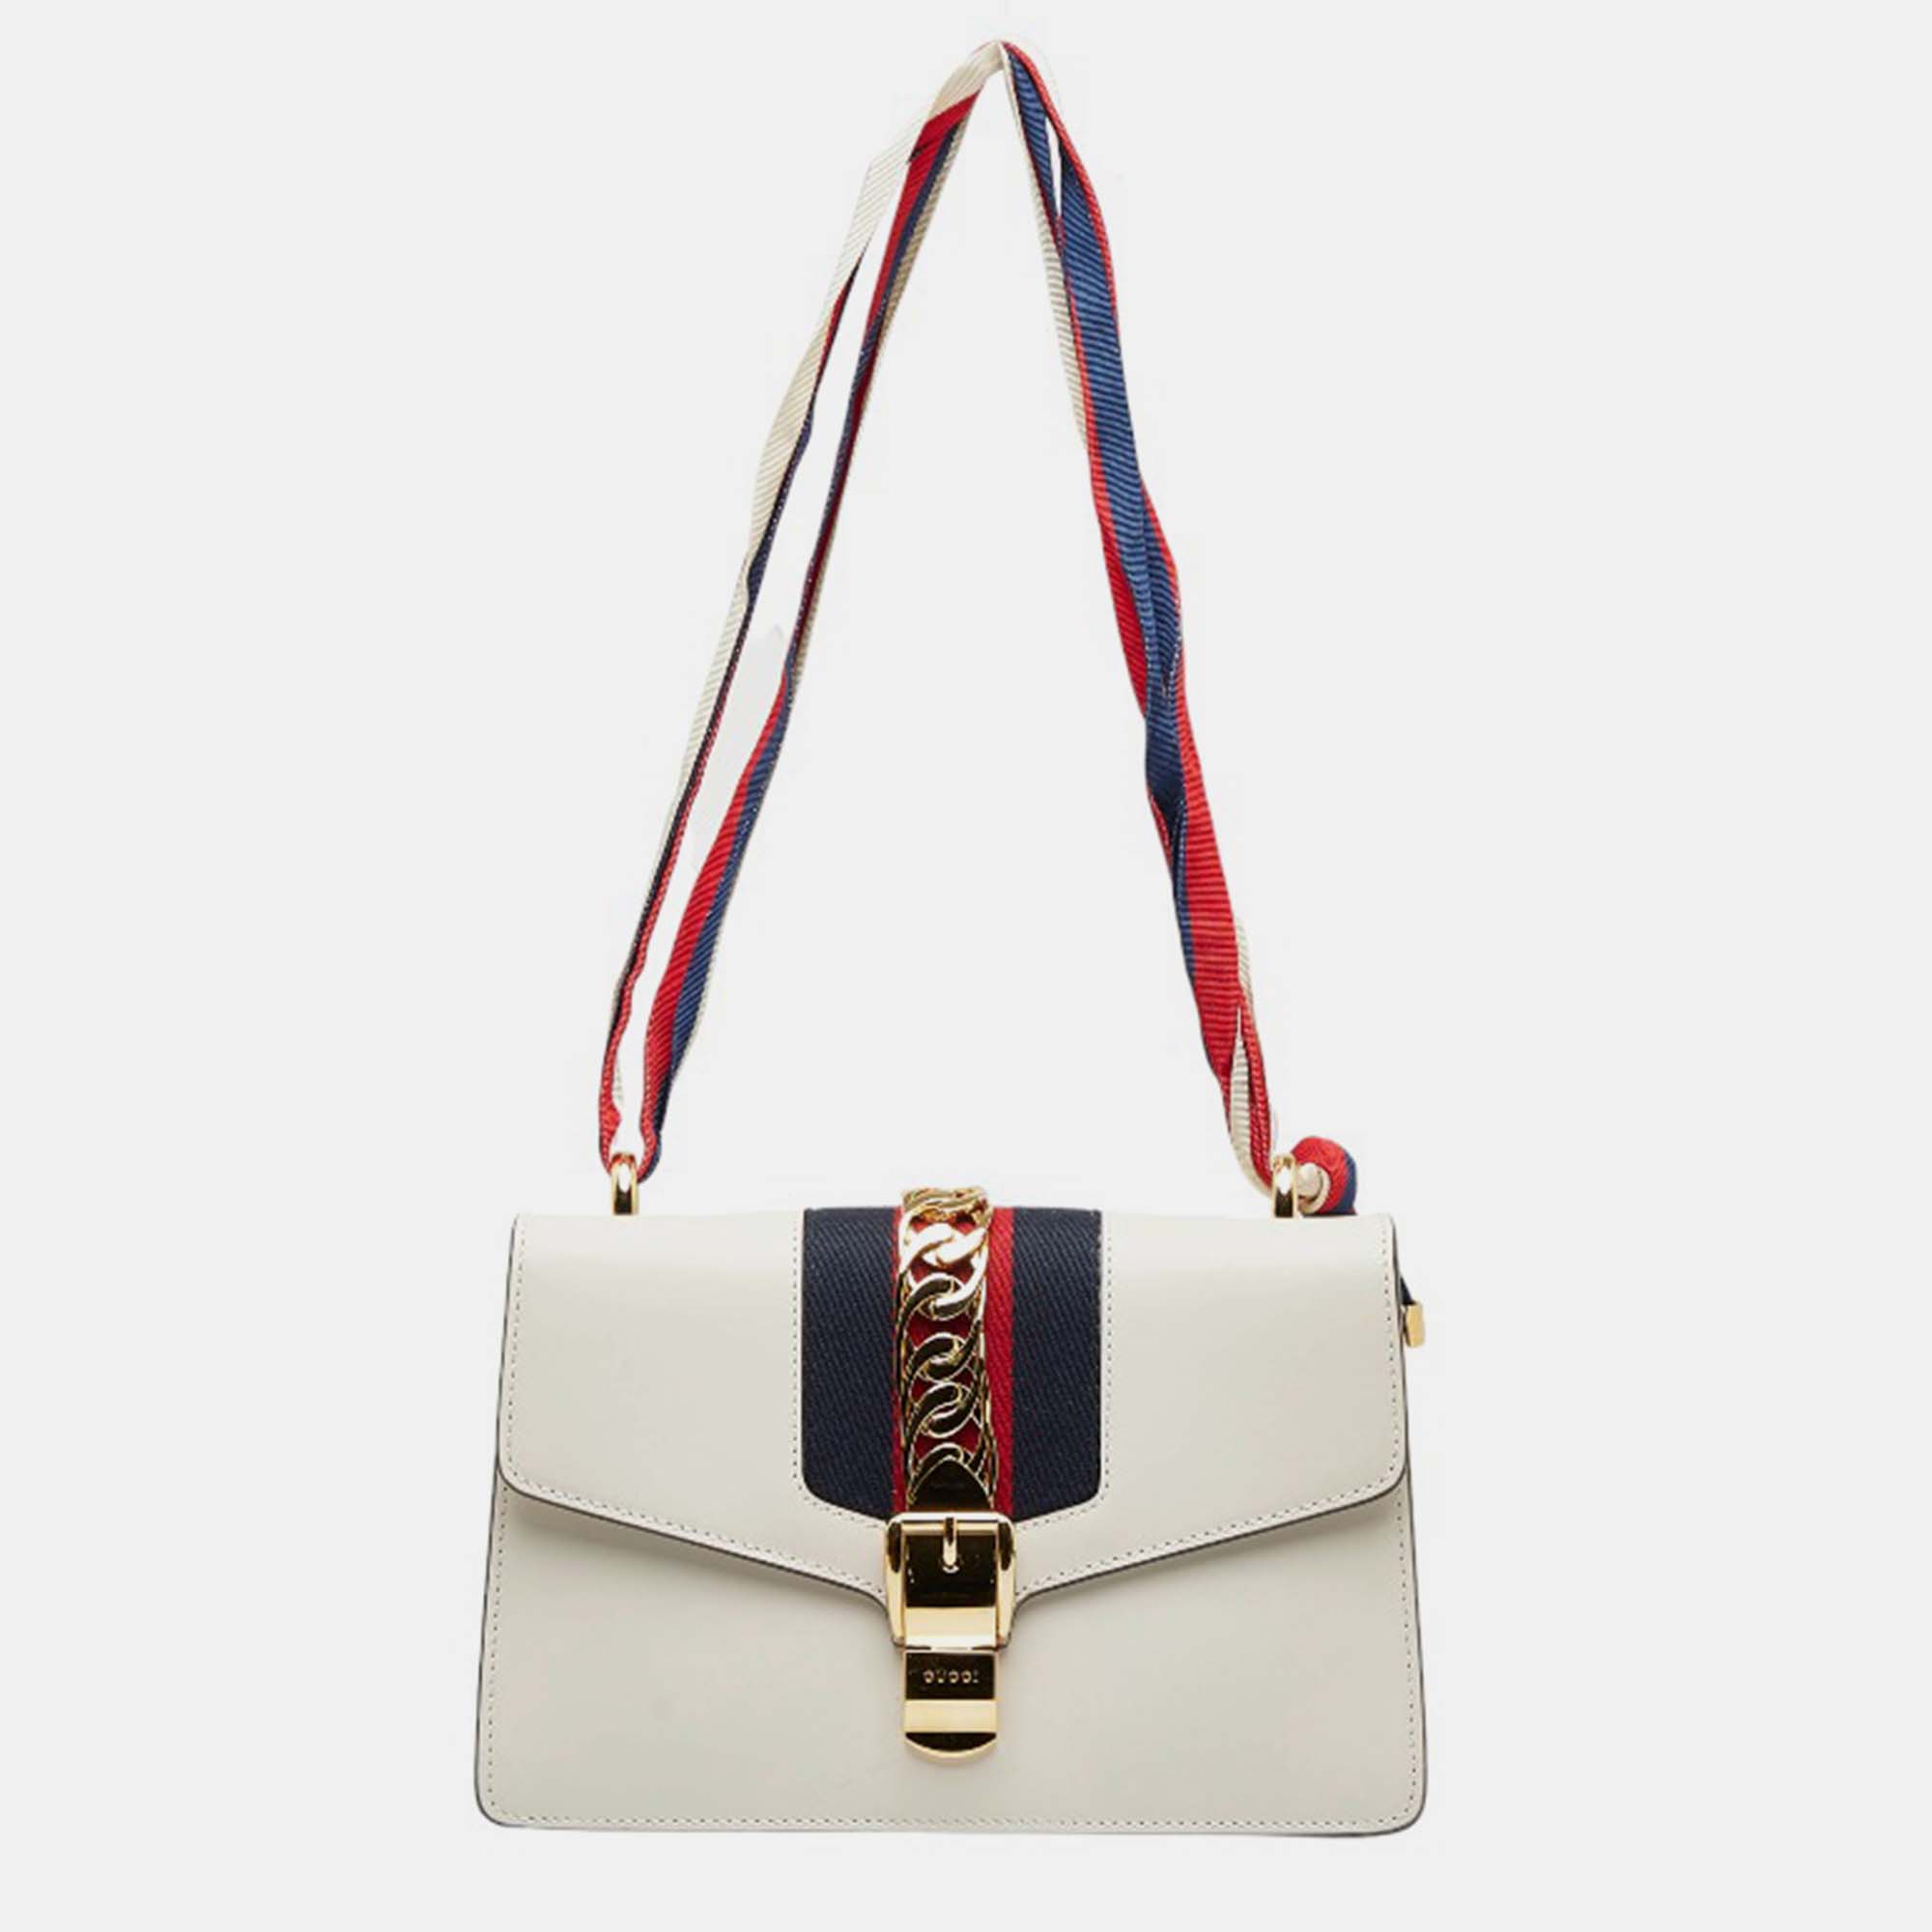 Gucci White Leather Small Sylvie Shoulder Bag